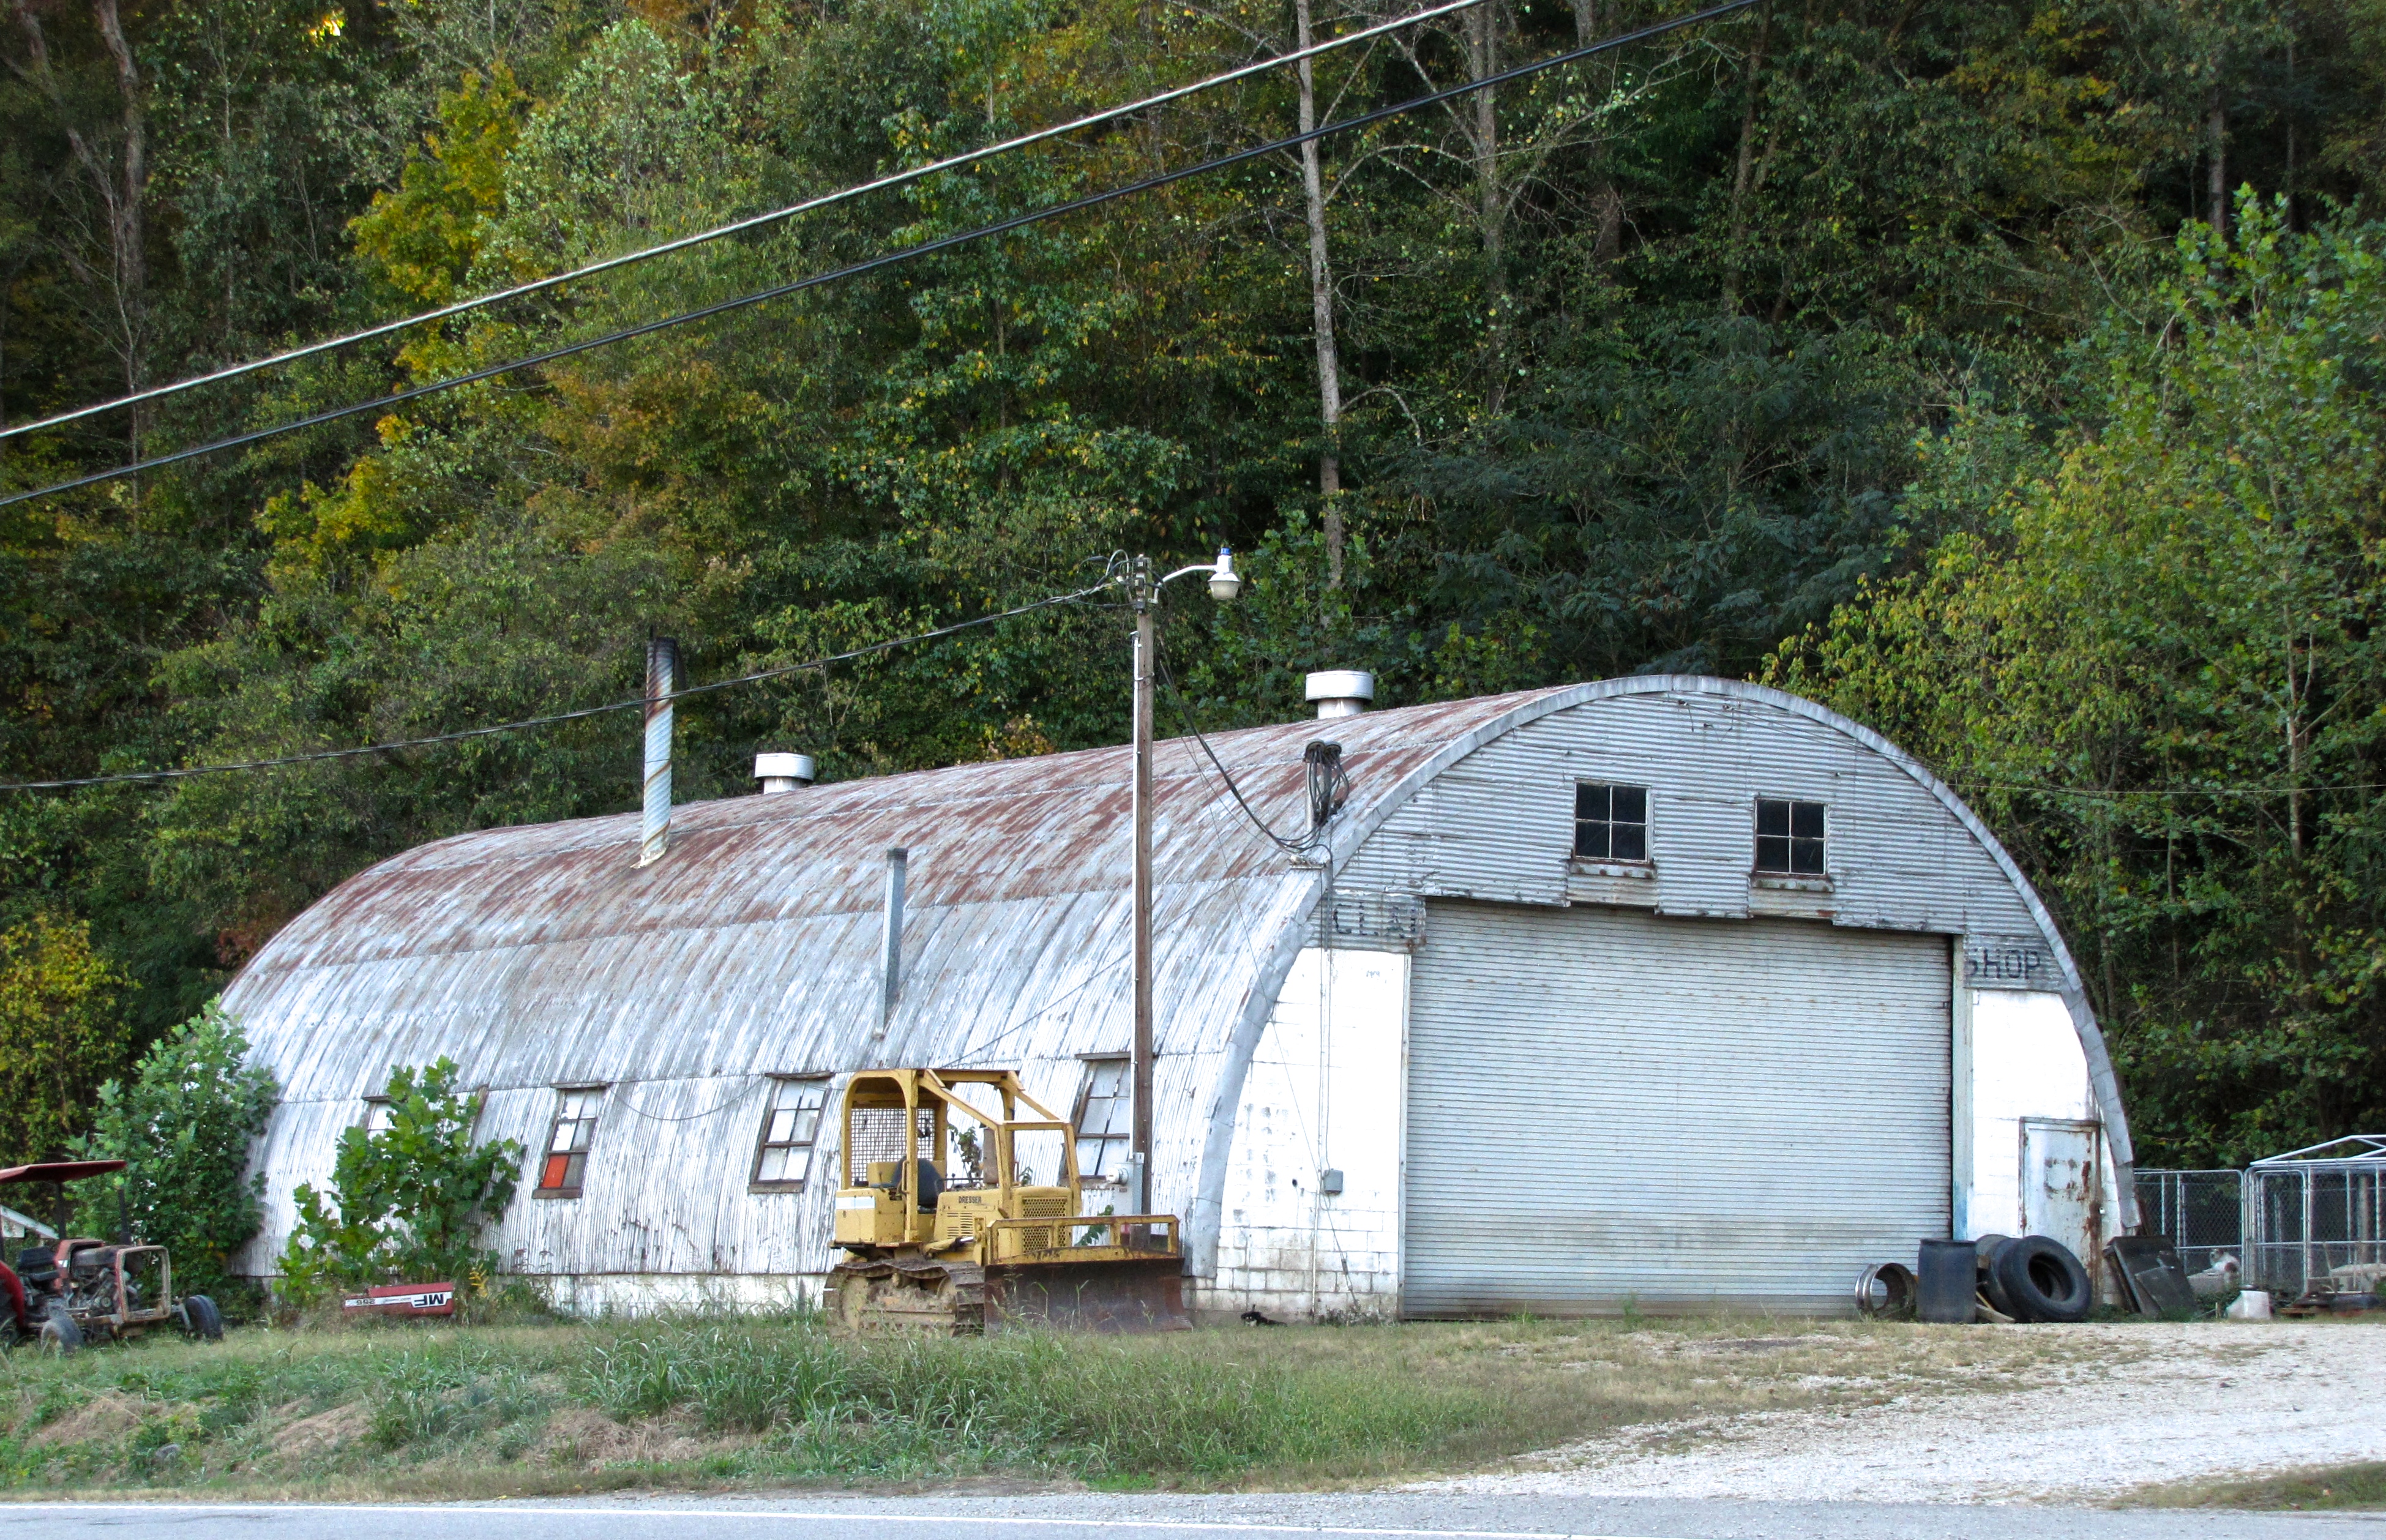 quonset hut in Bedford, NH